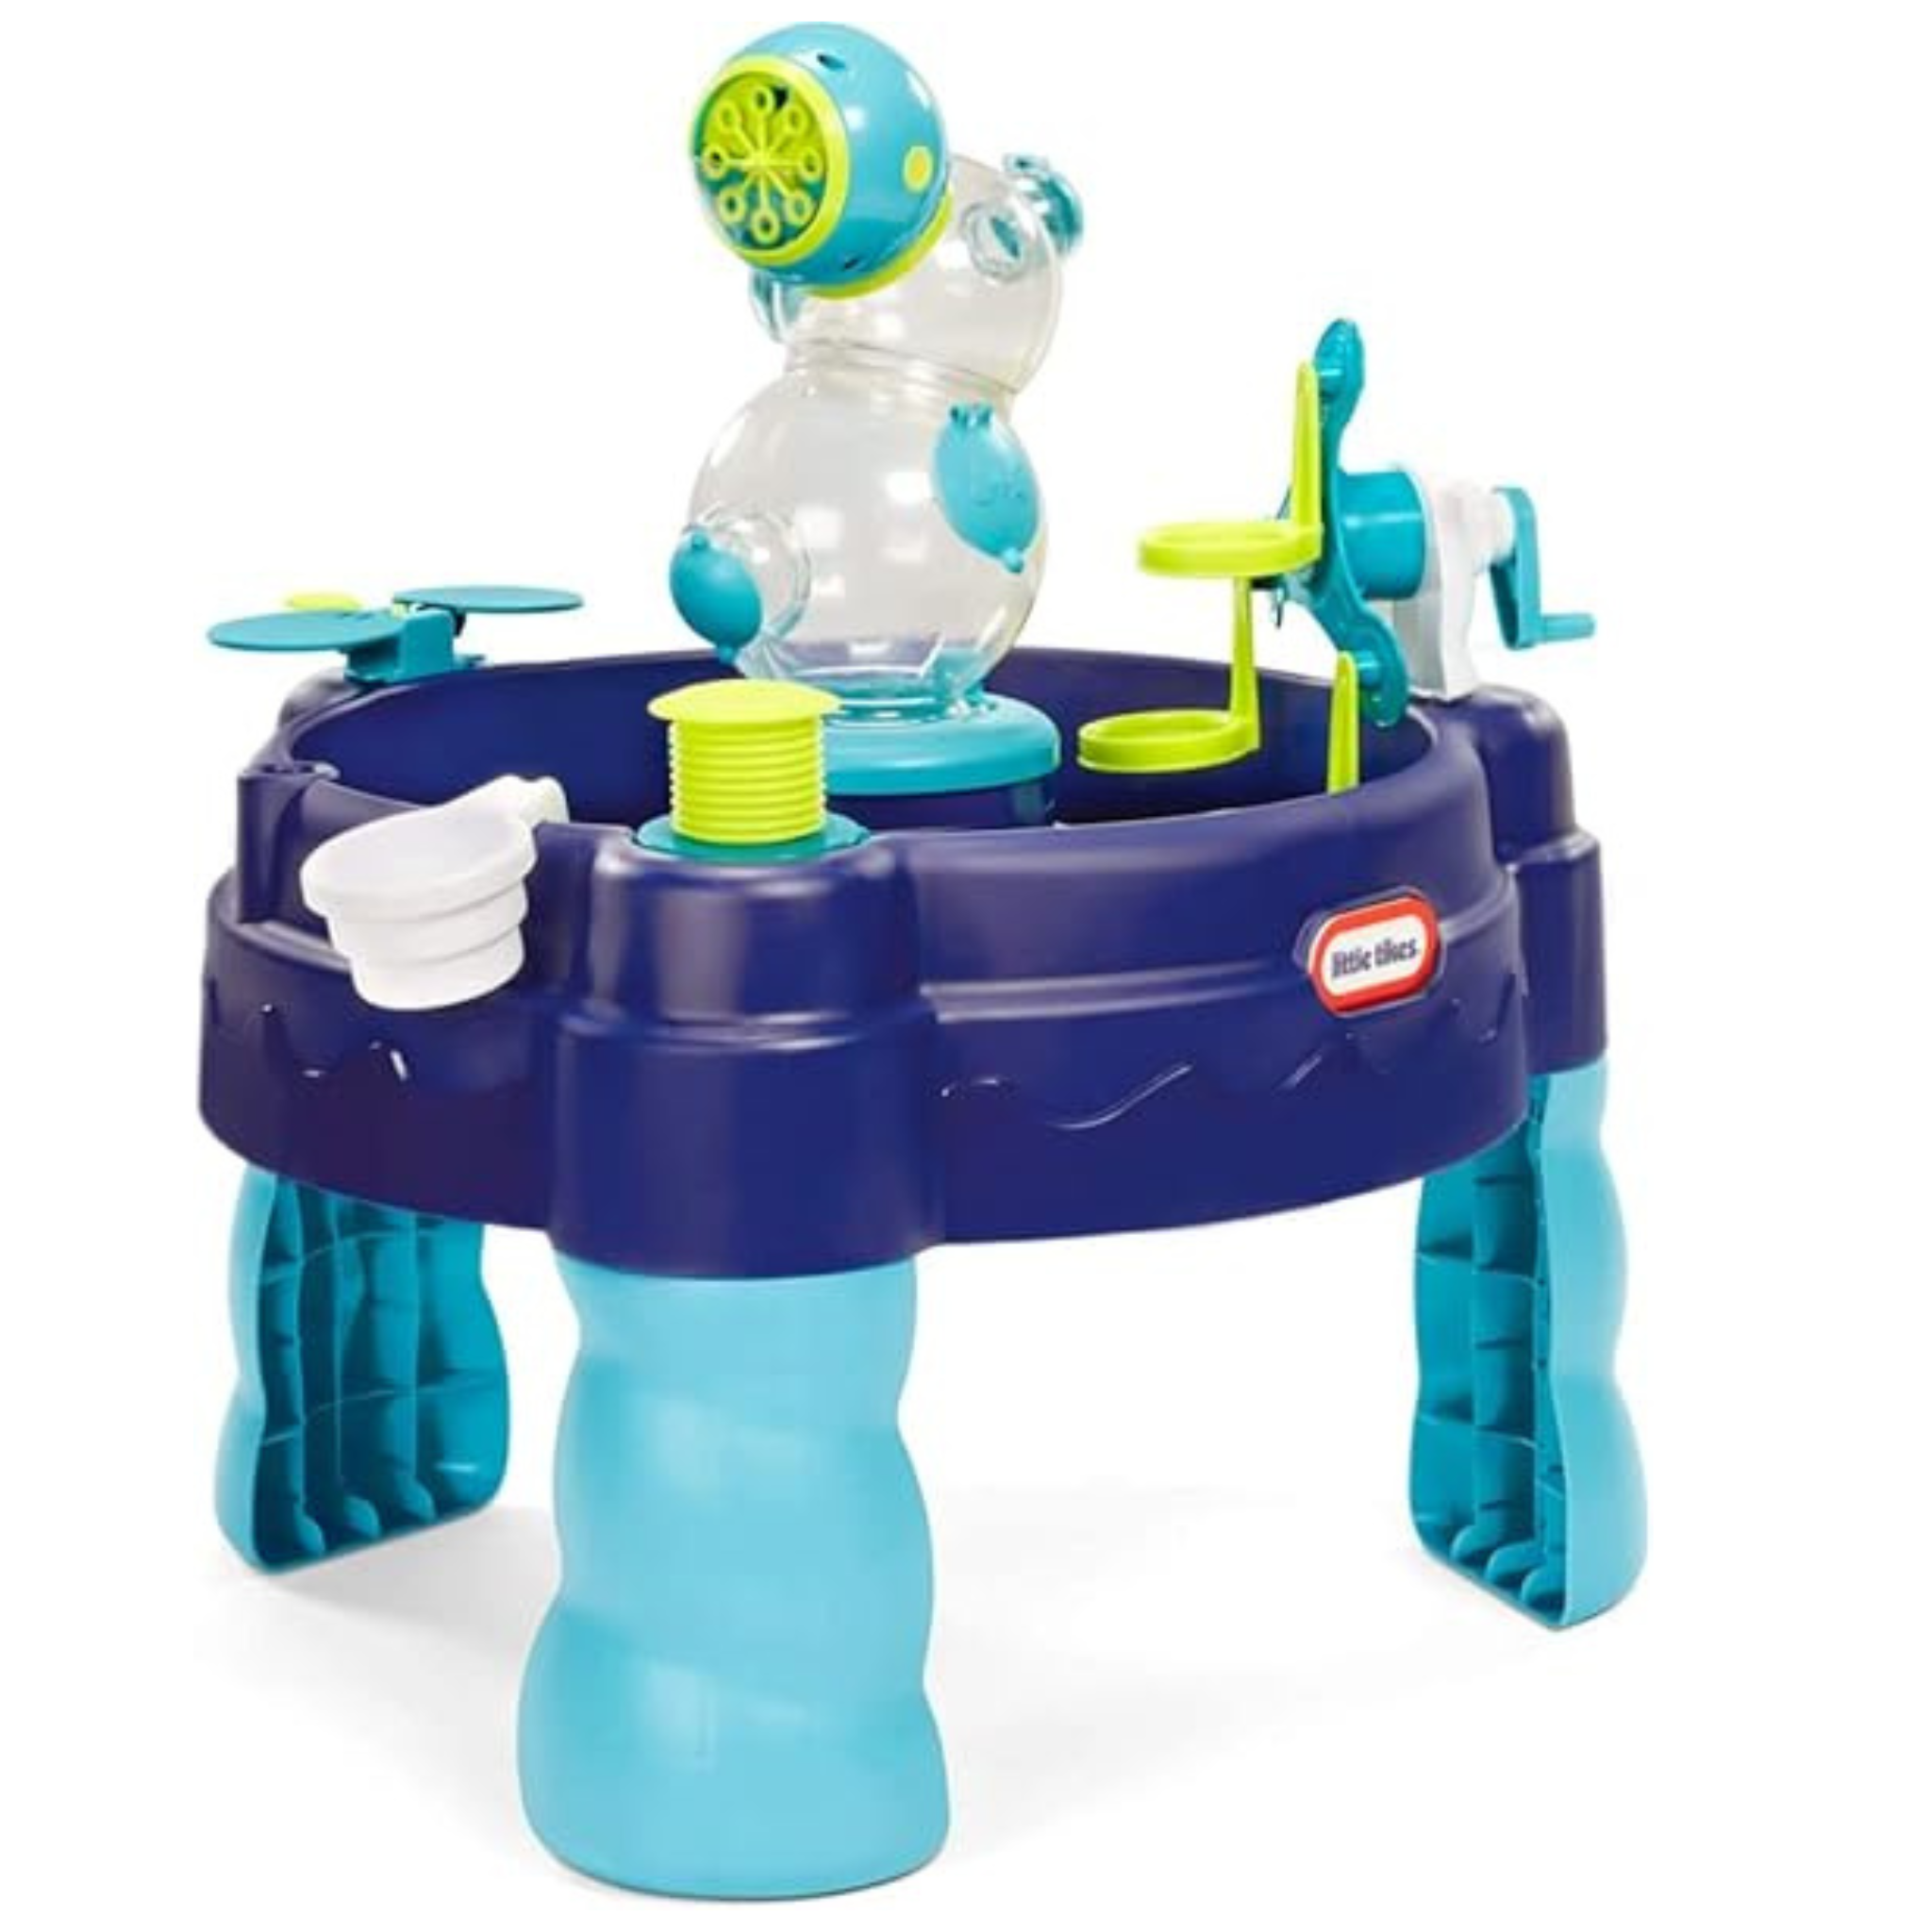 Little Tikes FOAMO 3-in-1 Water Table with Play Accessories